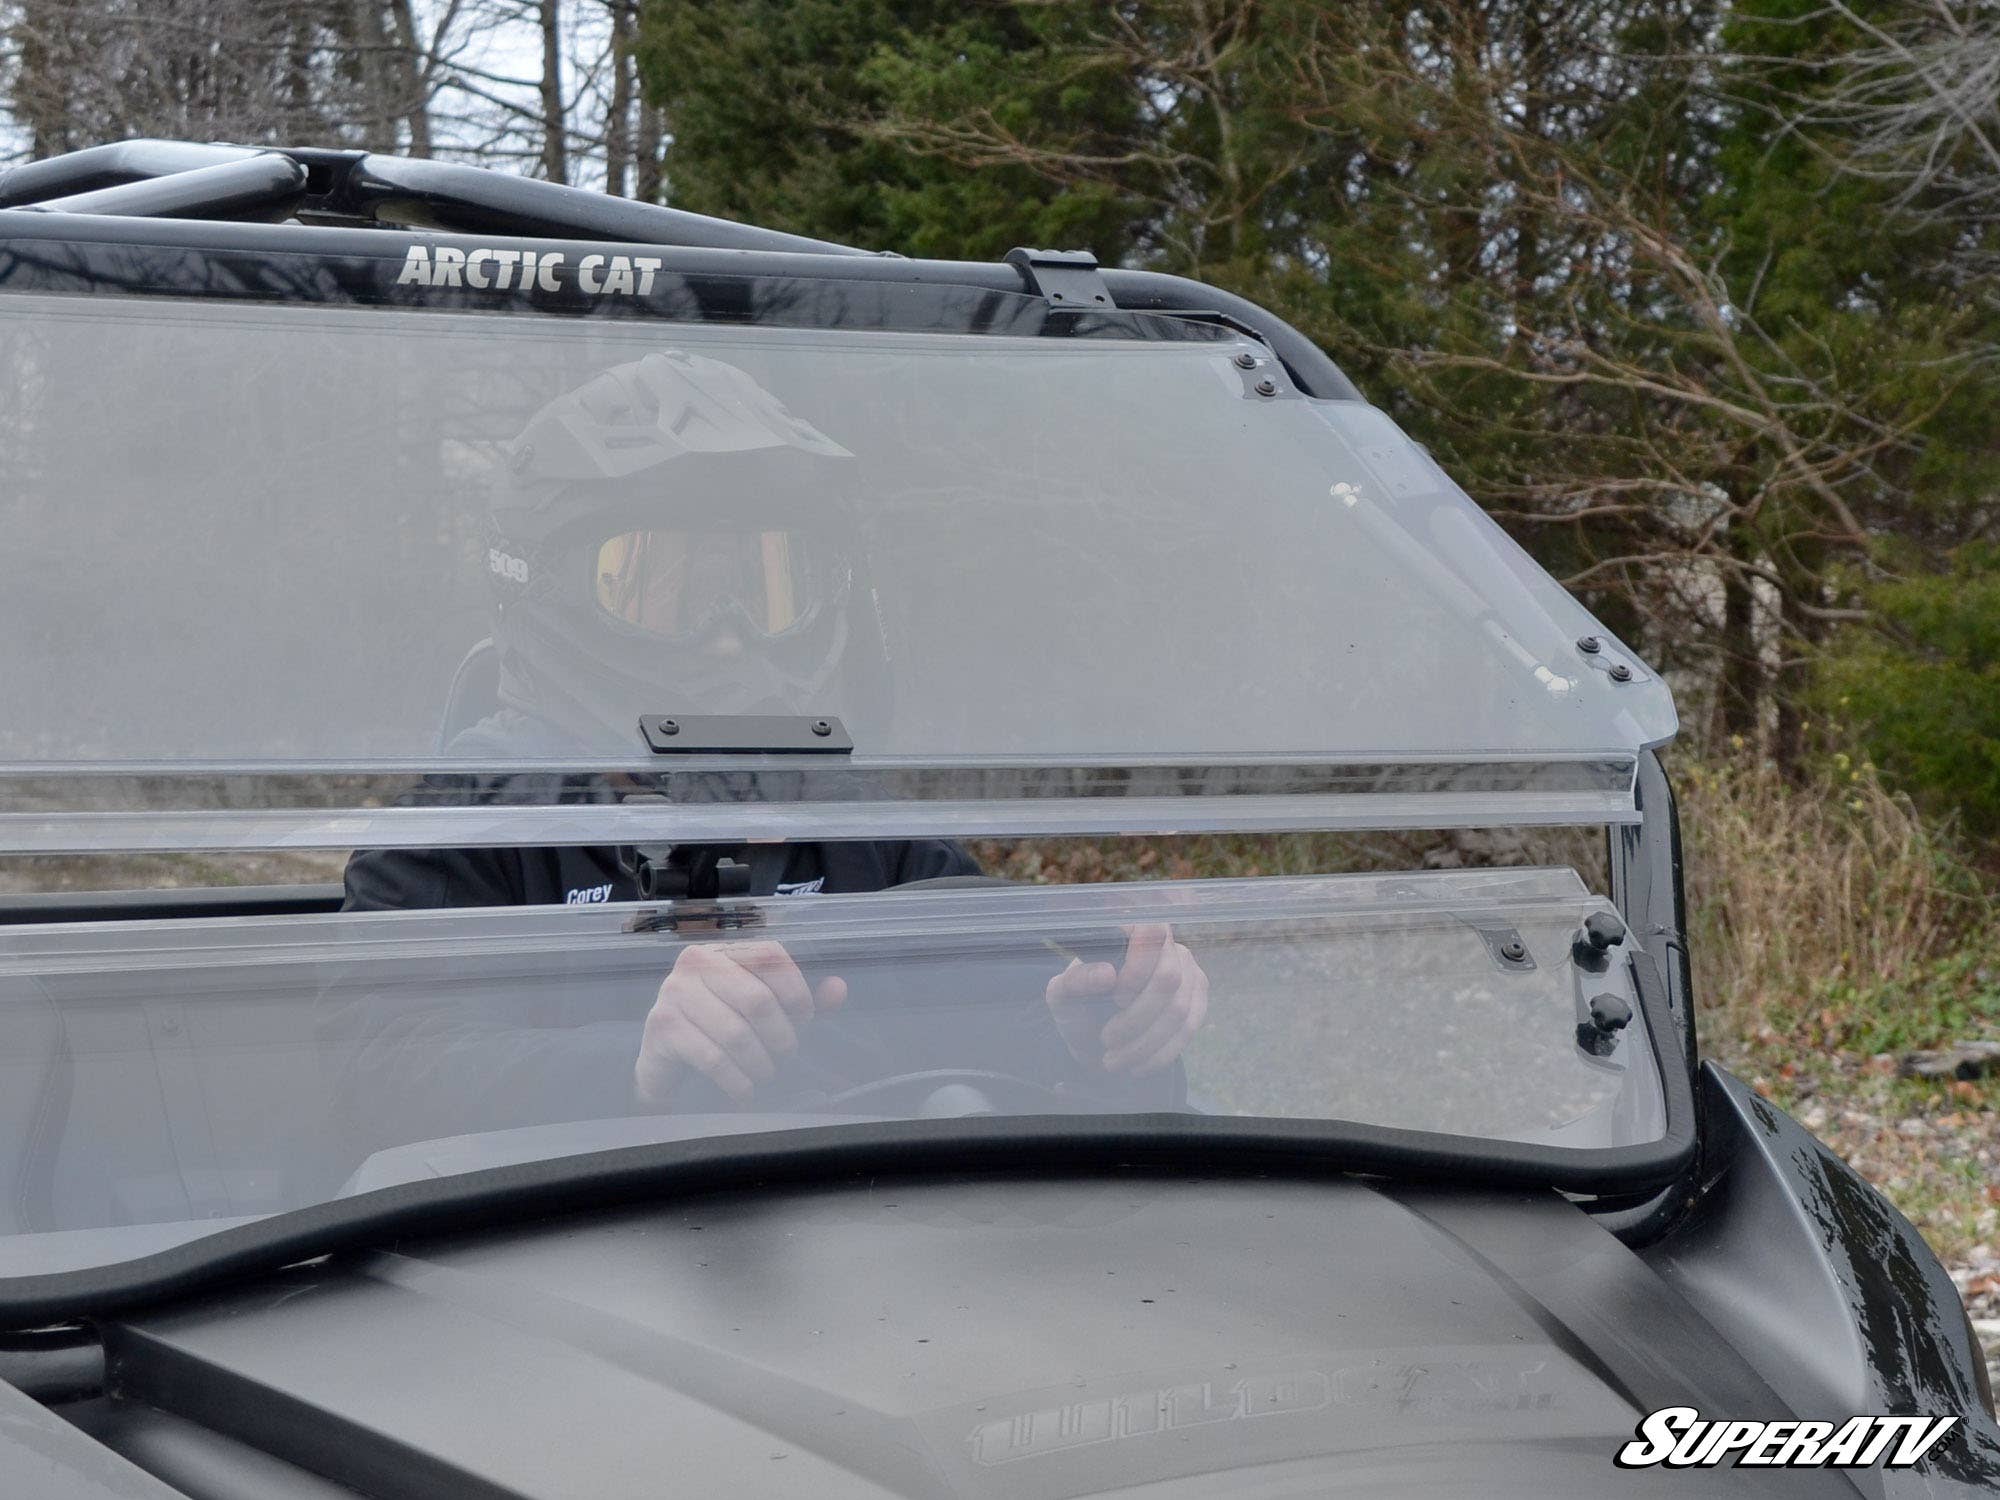 A rider in a helmet is visible through the clear, scratch-resistant flip windshield of an Arctic Cat Wildcat Trail utility vehicle. The windshield is securely mounted, showing parts of its adjustable latch and sturdy frame, set against a backdrop of trees and cloudy skies.